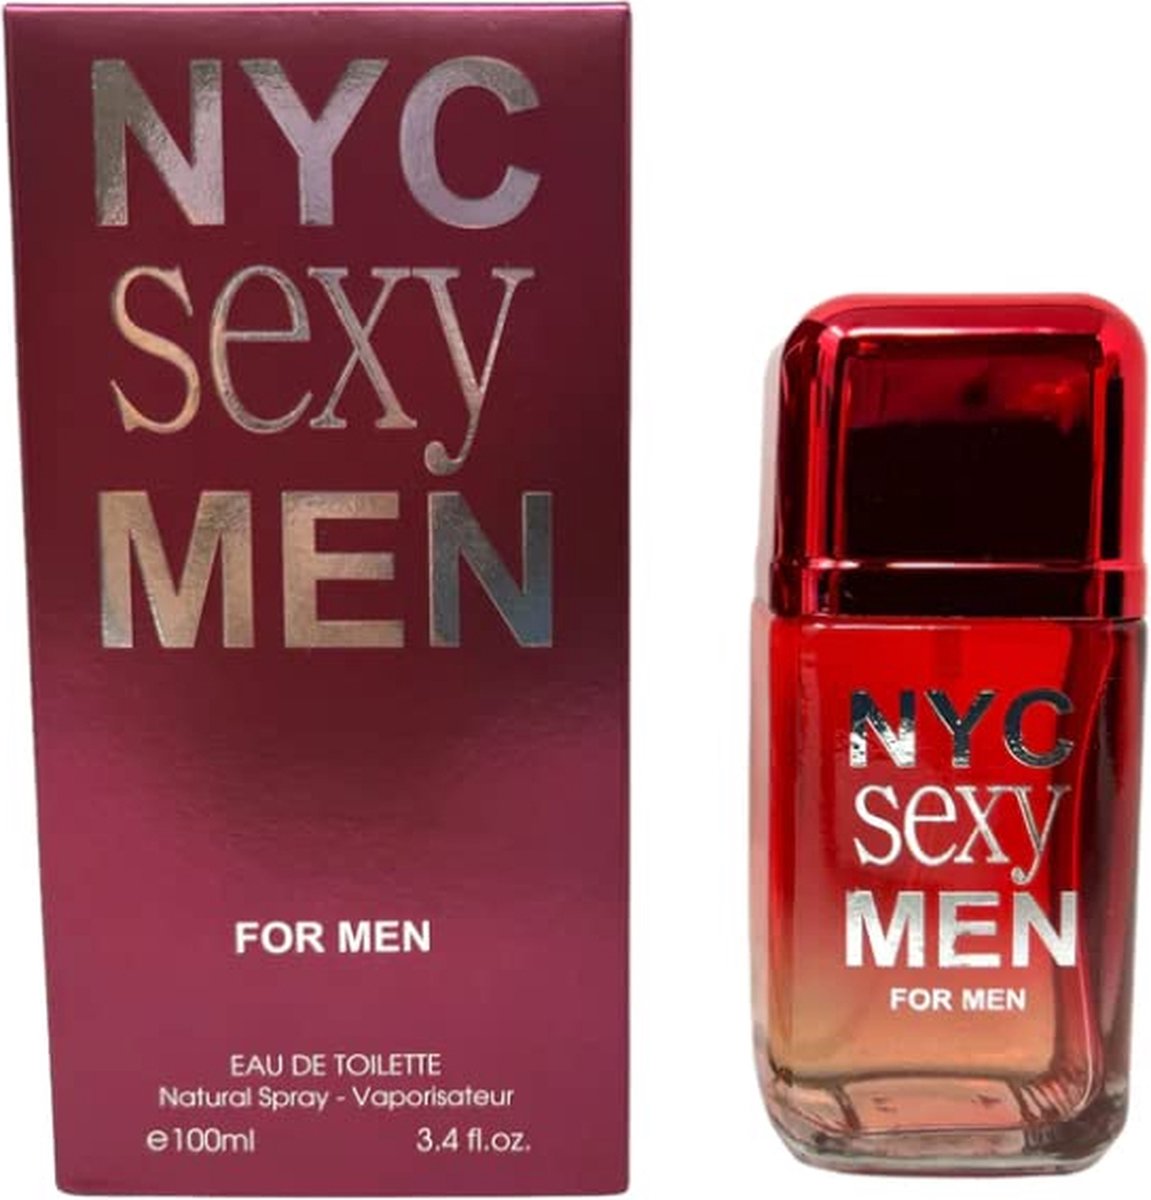 NYC Sexy Men EDT by Fragrance couture 100 ml.